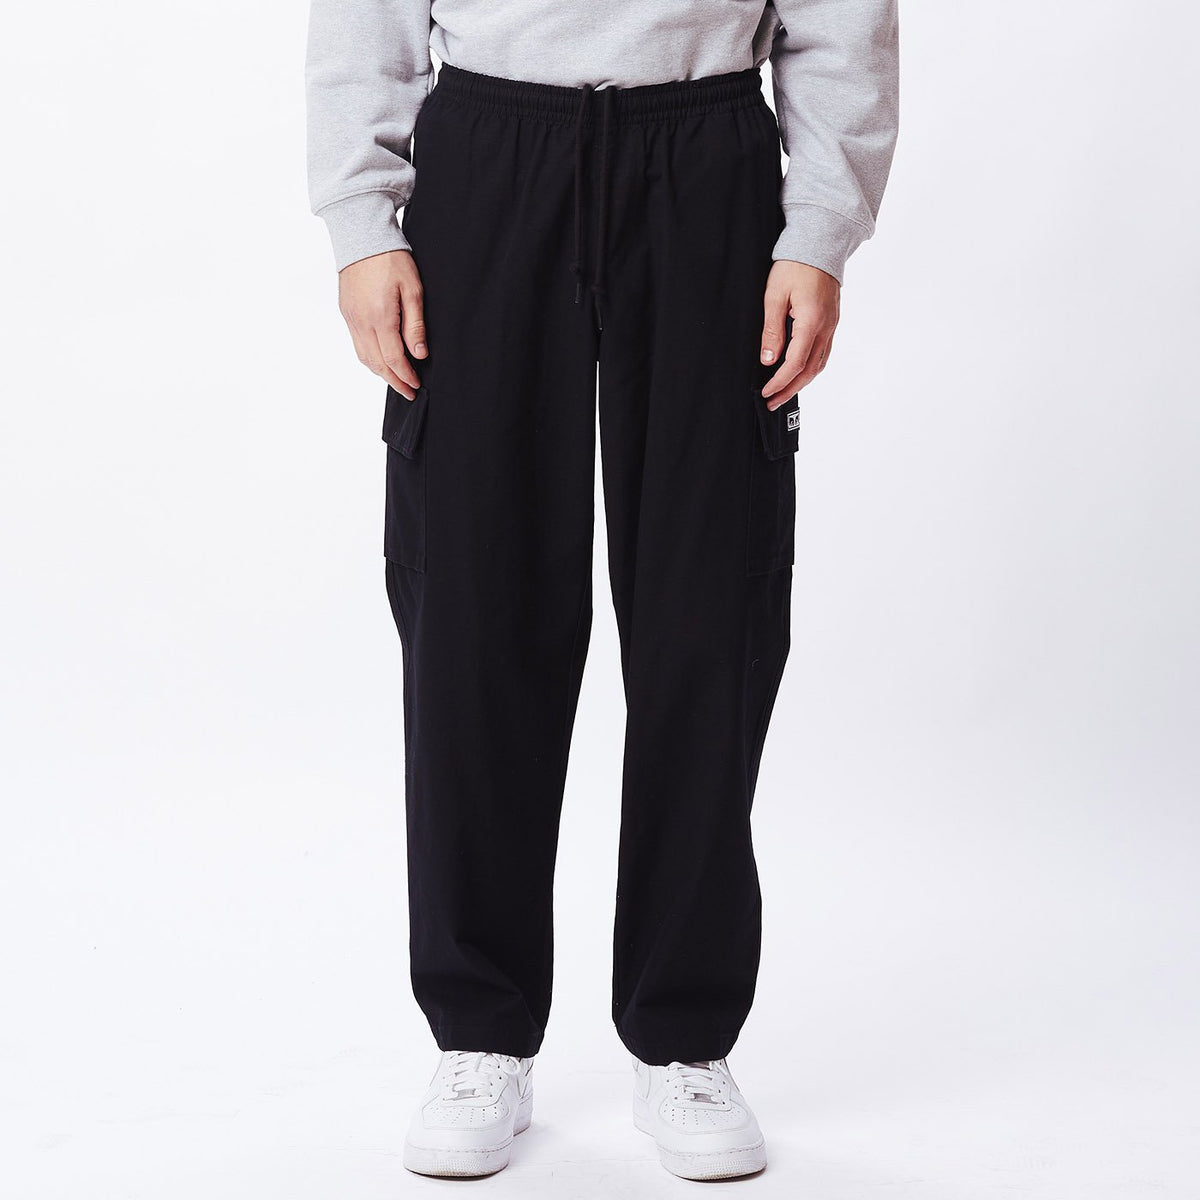 The Most OBEY Easy Big Boy Cargo Pant Obey is now available for